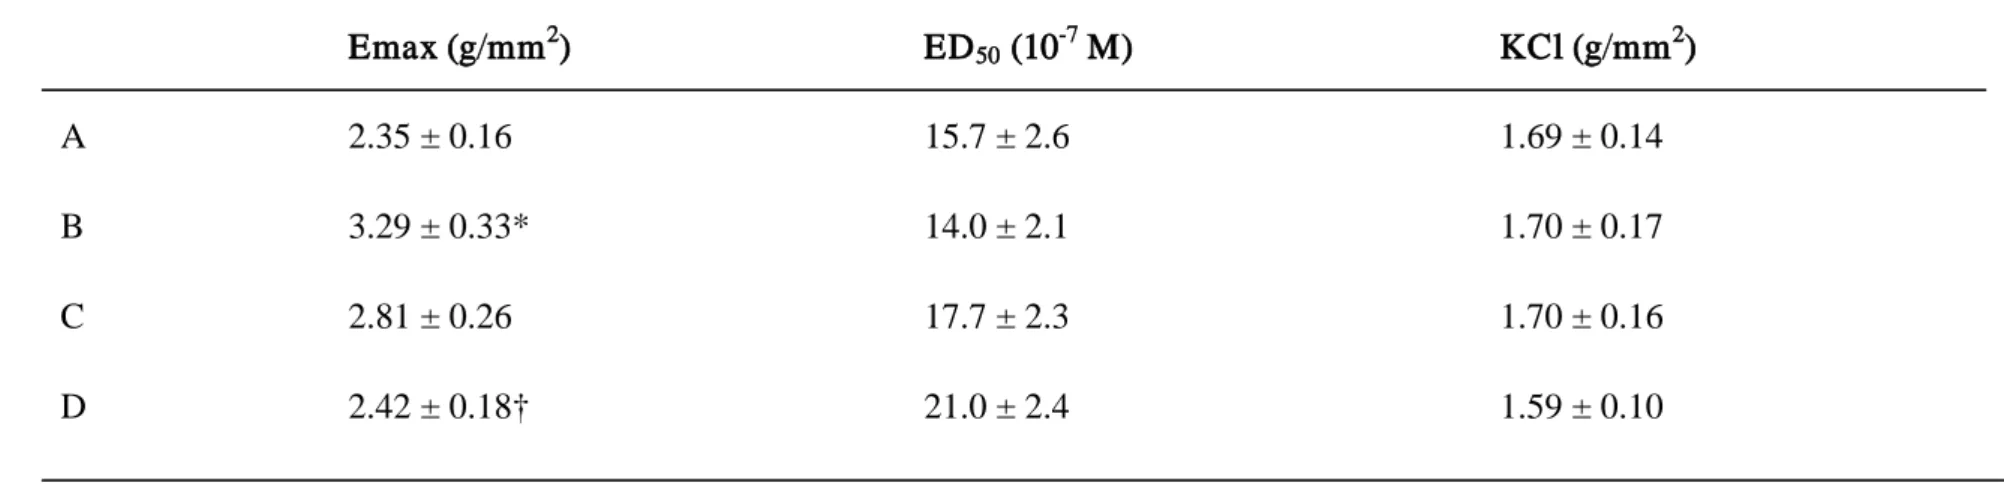 Table 4.    Functional studies in the exper imental r ats            Emax (g/mm 2 )      ED 50  (10 -7  M)    KCl (g/mm 2 A    2.35 ± 0.16  15.7 ± 2.6  1.69 ± 0.14  )         B  3.29 ± 0.33*  14.0 ± 2.1  1.70 ± 0.17  C  2.81 ± 0.26  17.7 ± 2.3  1.70 ± 0.16